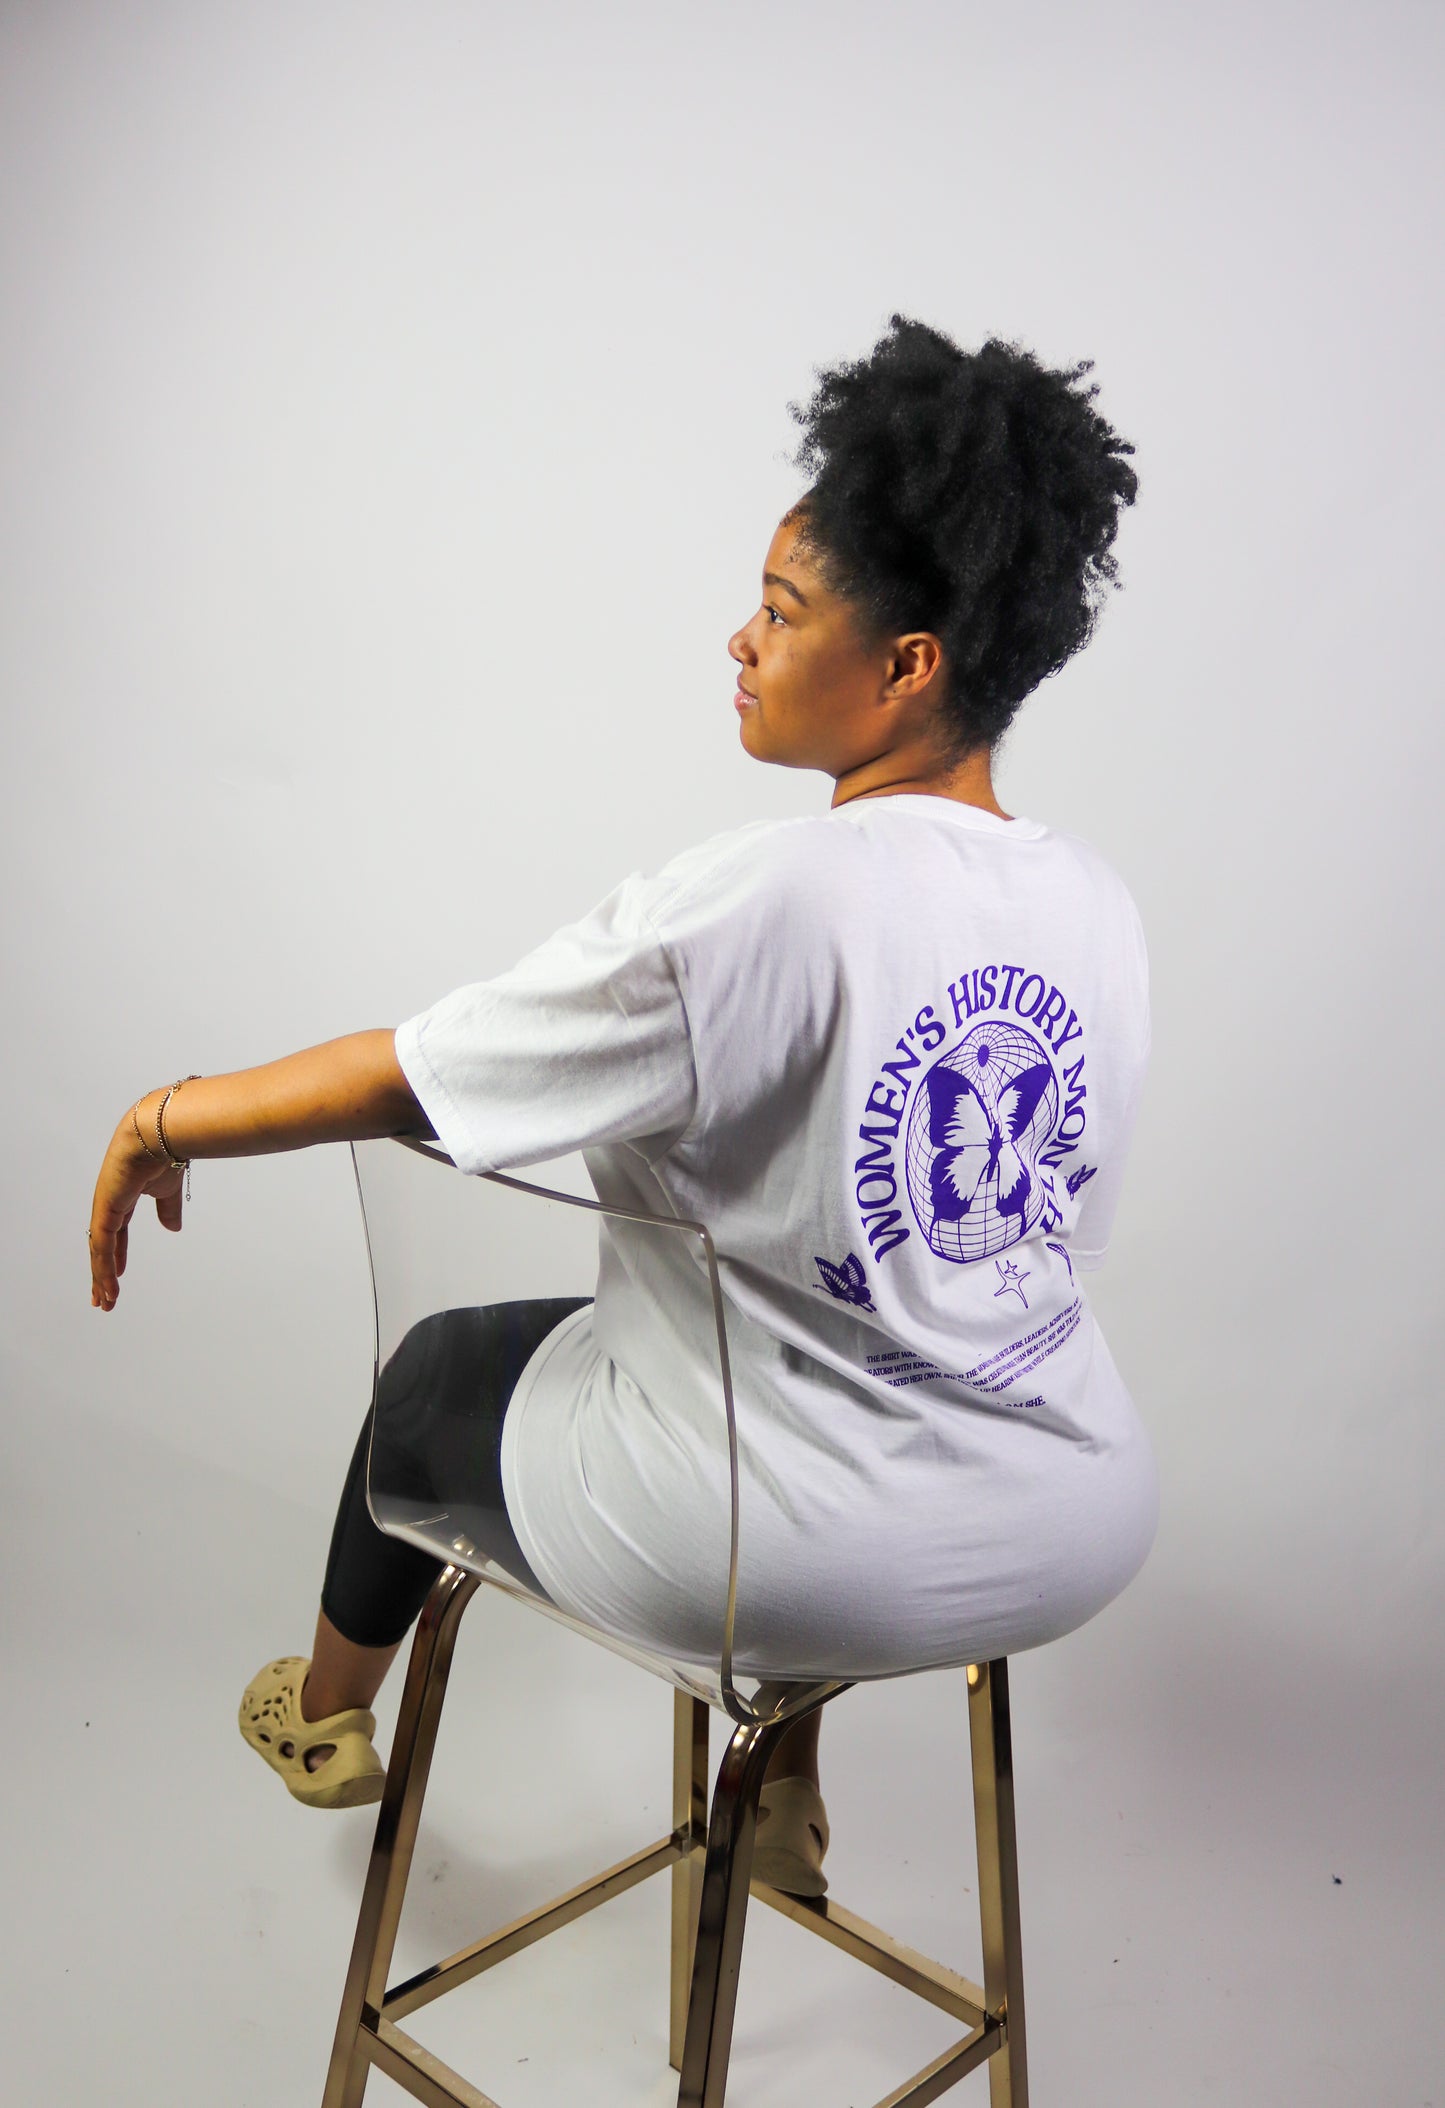 Limited Edition - ‘I AM SHE’ - Women’s History Month T-Shirt